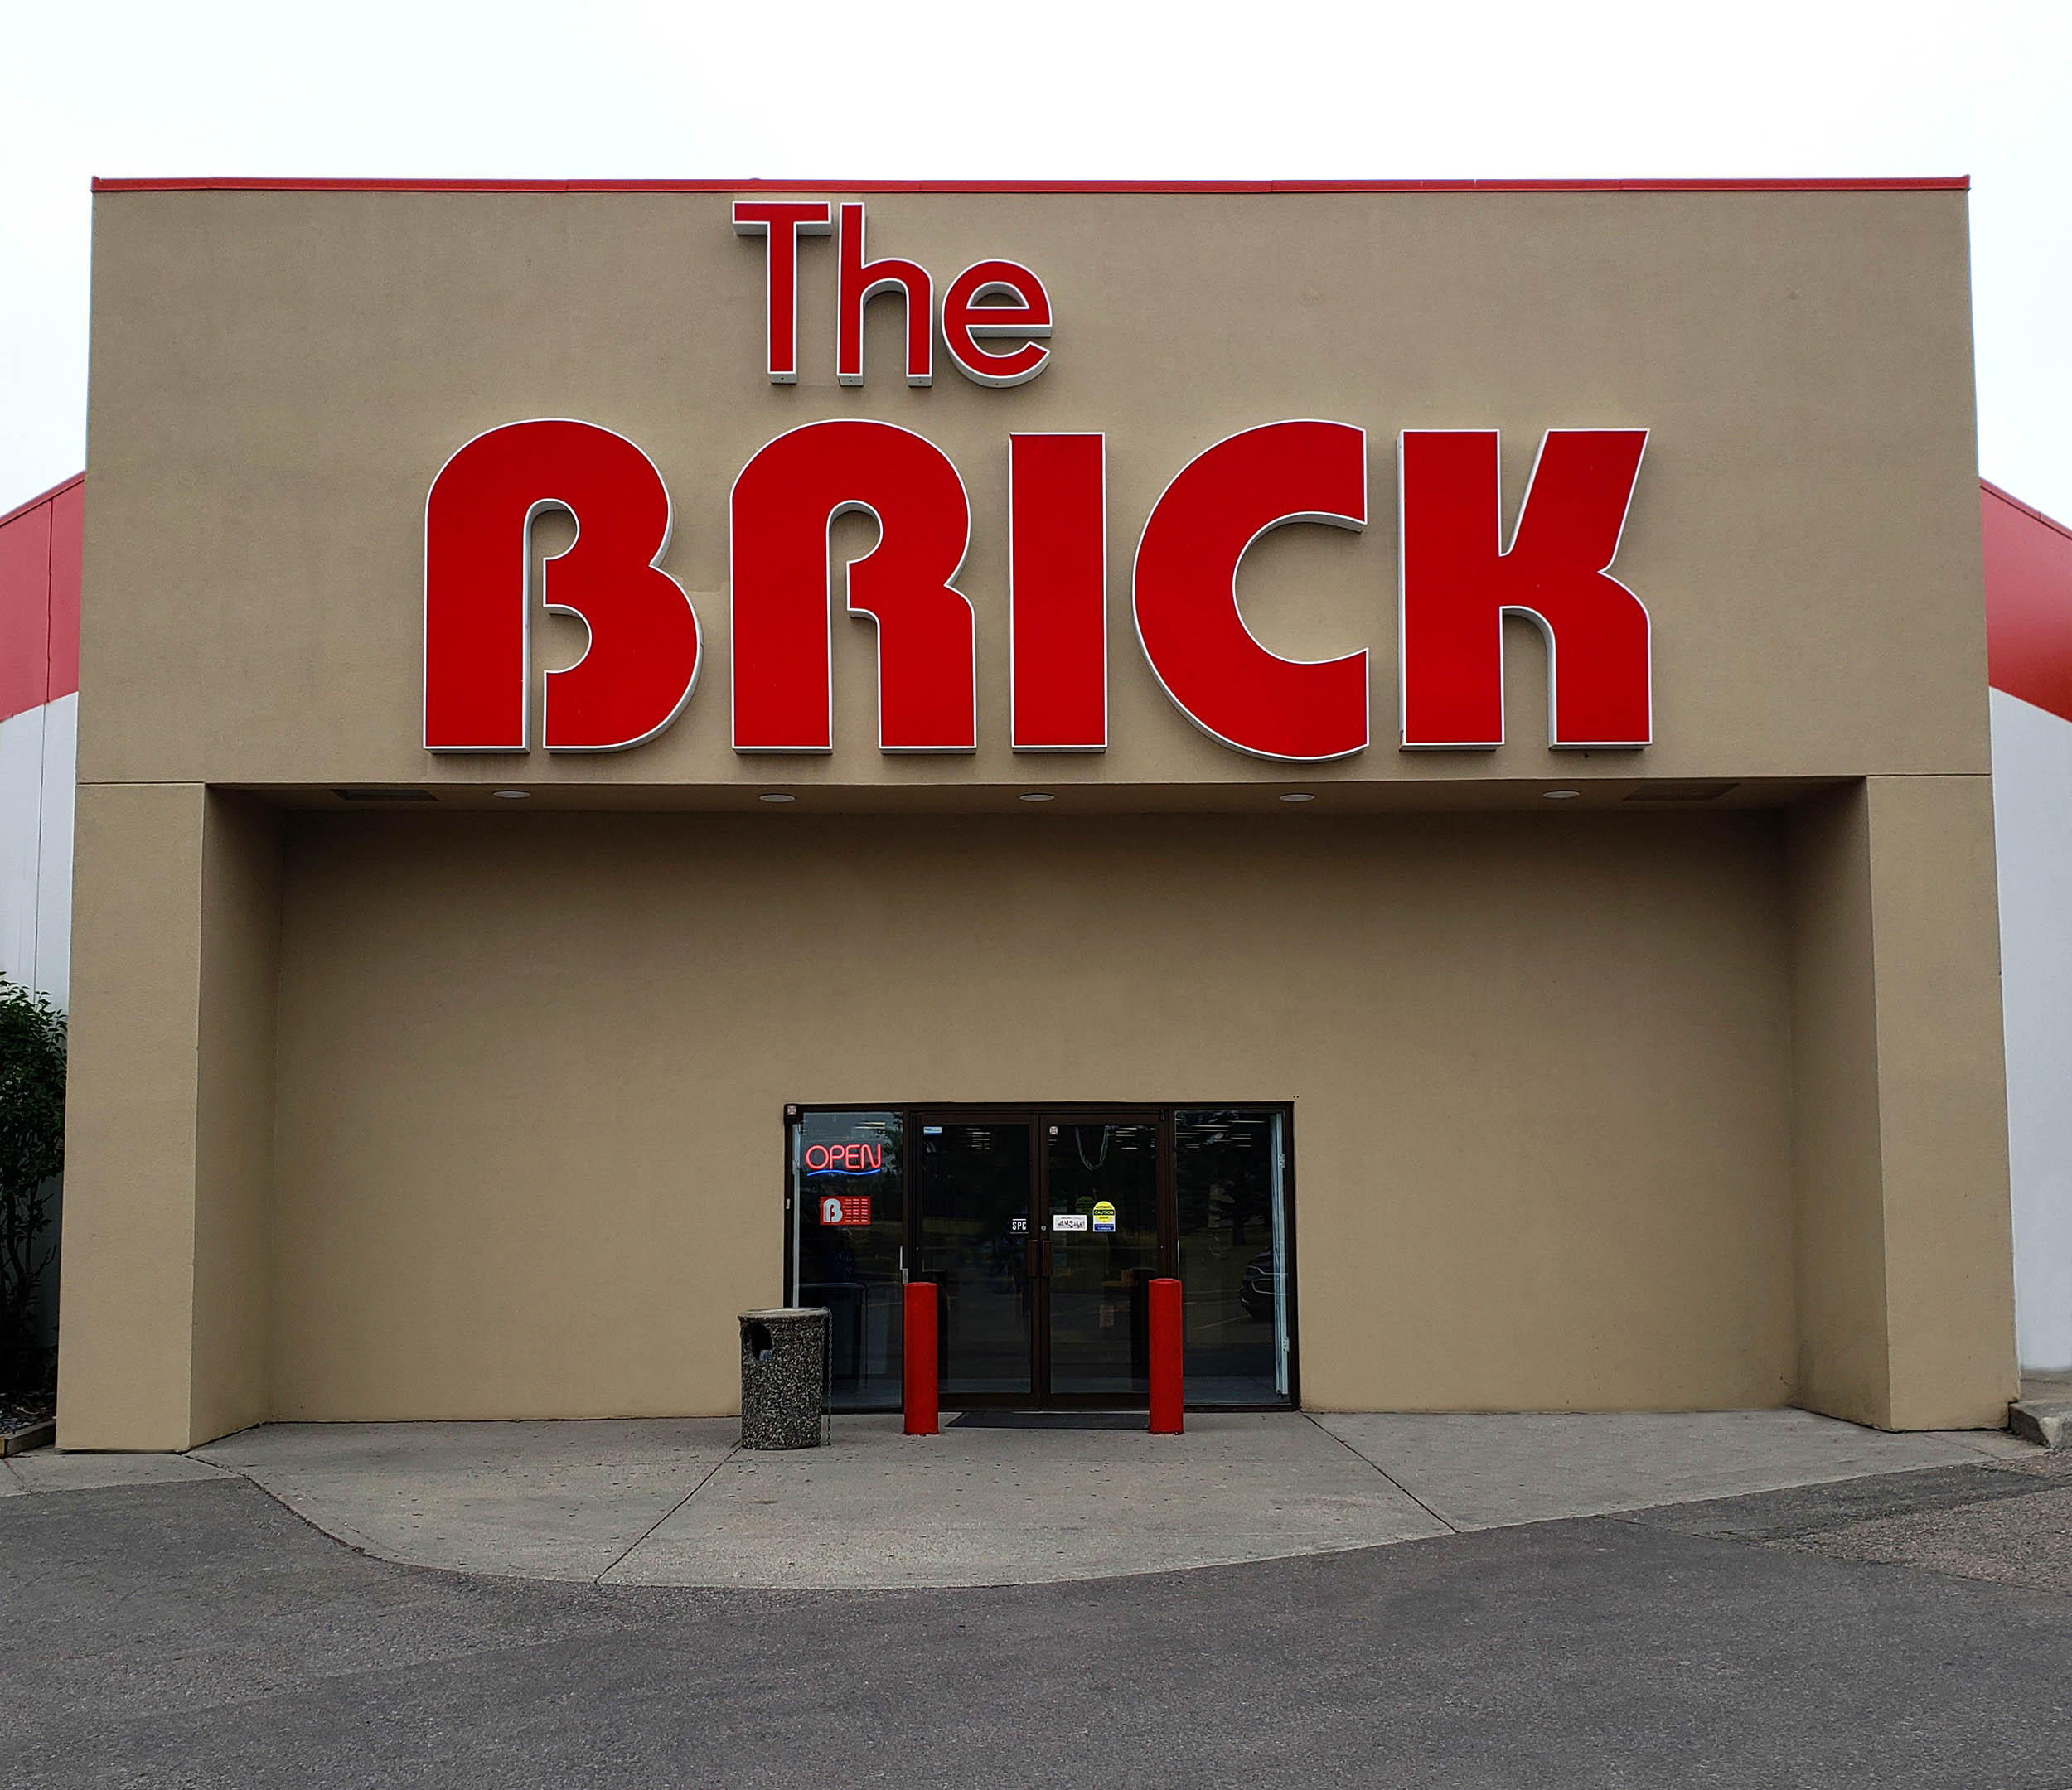 Images The Brick